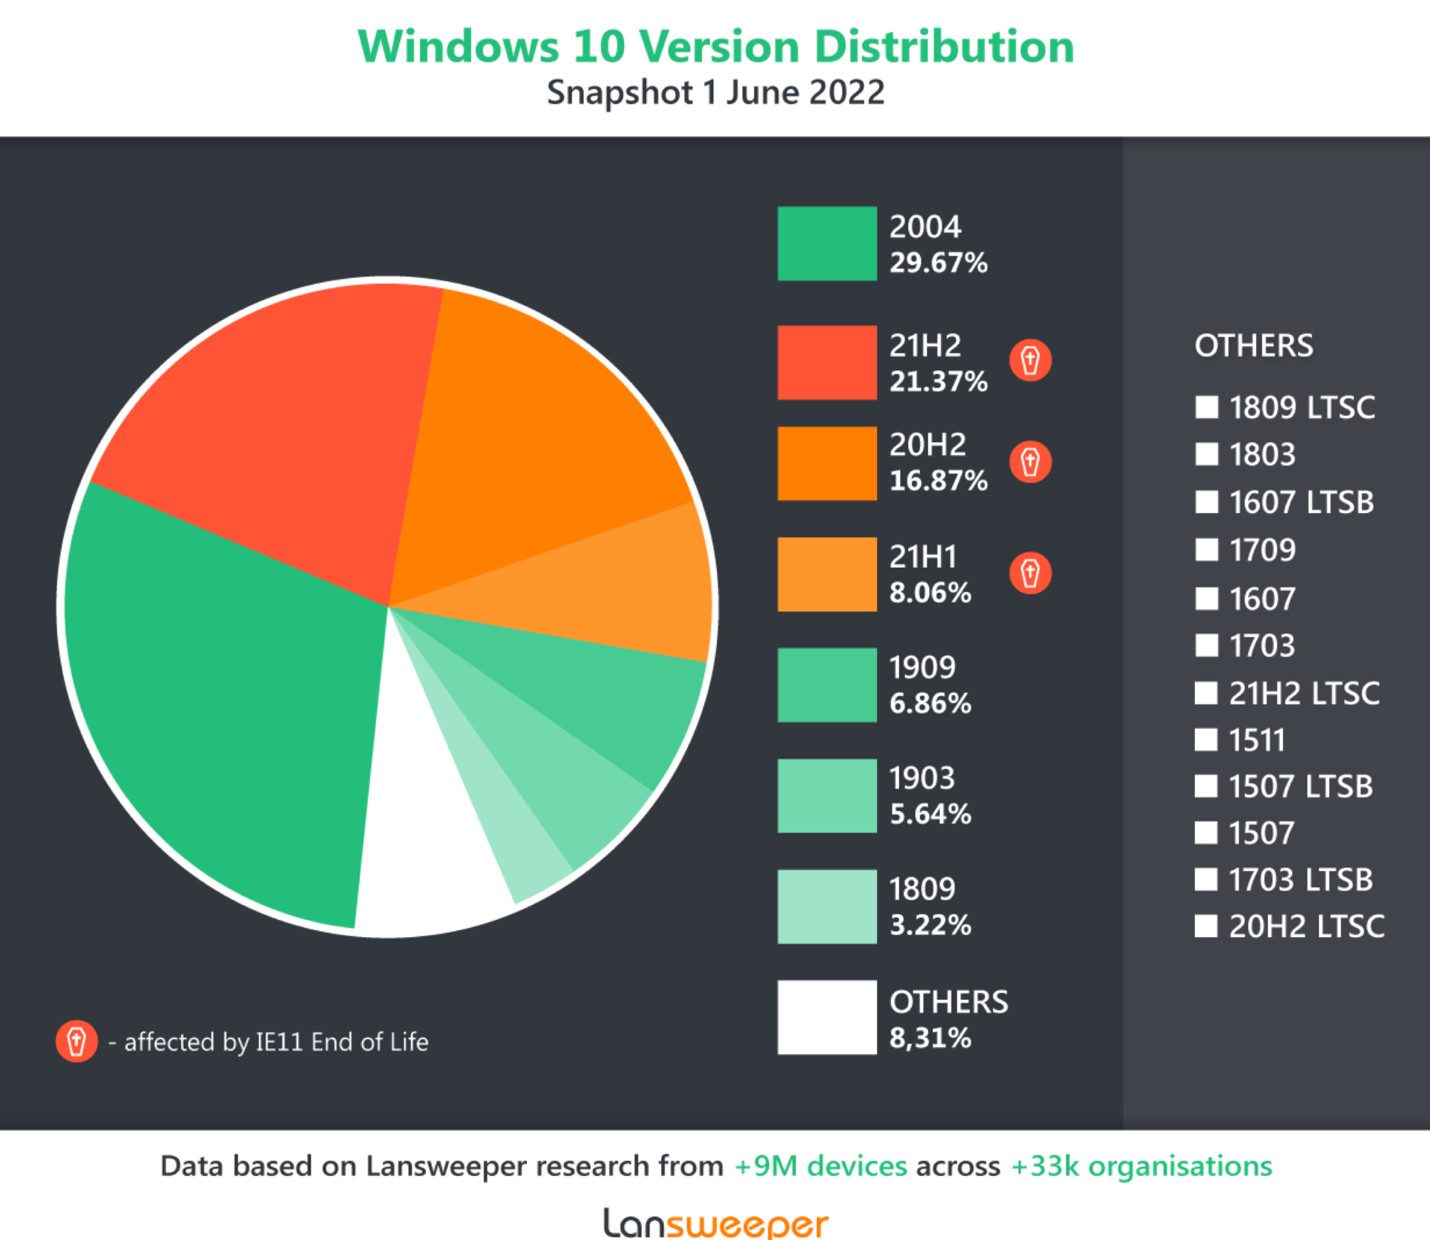 New Report Shows 47% of Enterprise Windows 10 PCs Could Be Impacted by Internet Explorer’s Retirement on June 15